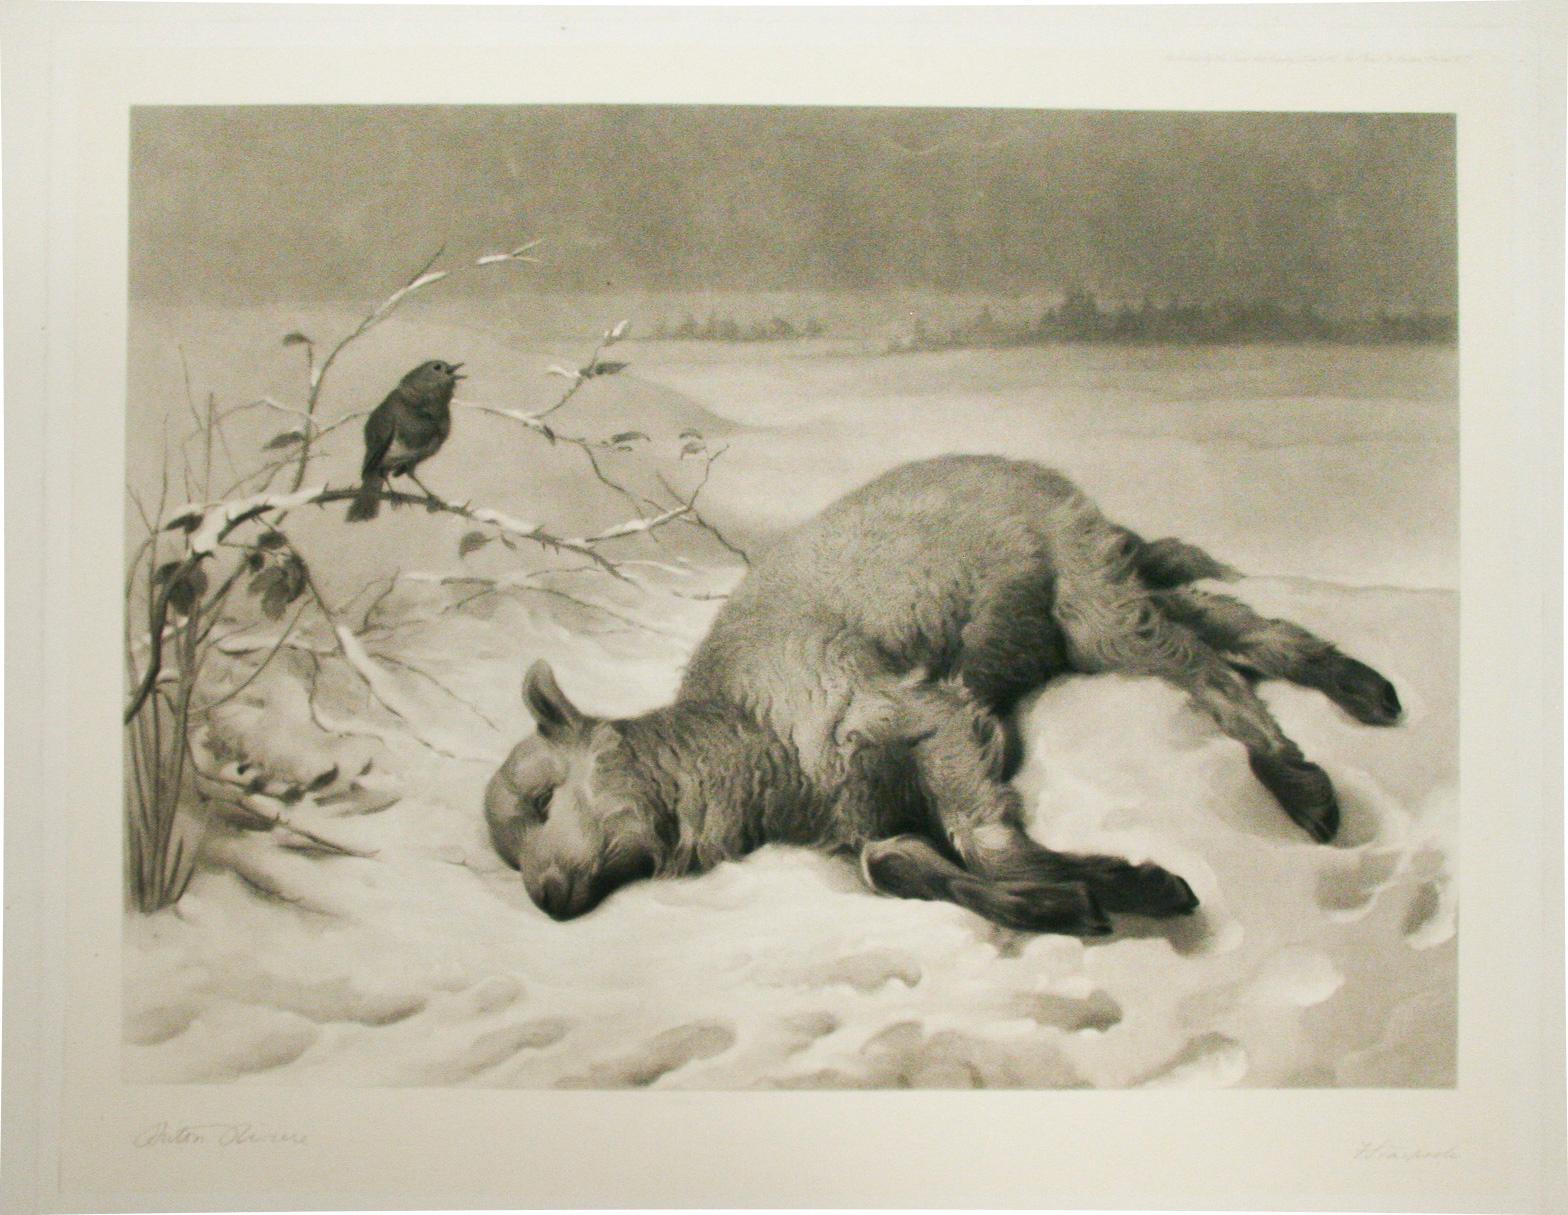 Briton Riviere Animal Print - "Strayed From the Flock, " Artist Signed Print, Engraved by Frederick Stacpoole 